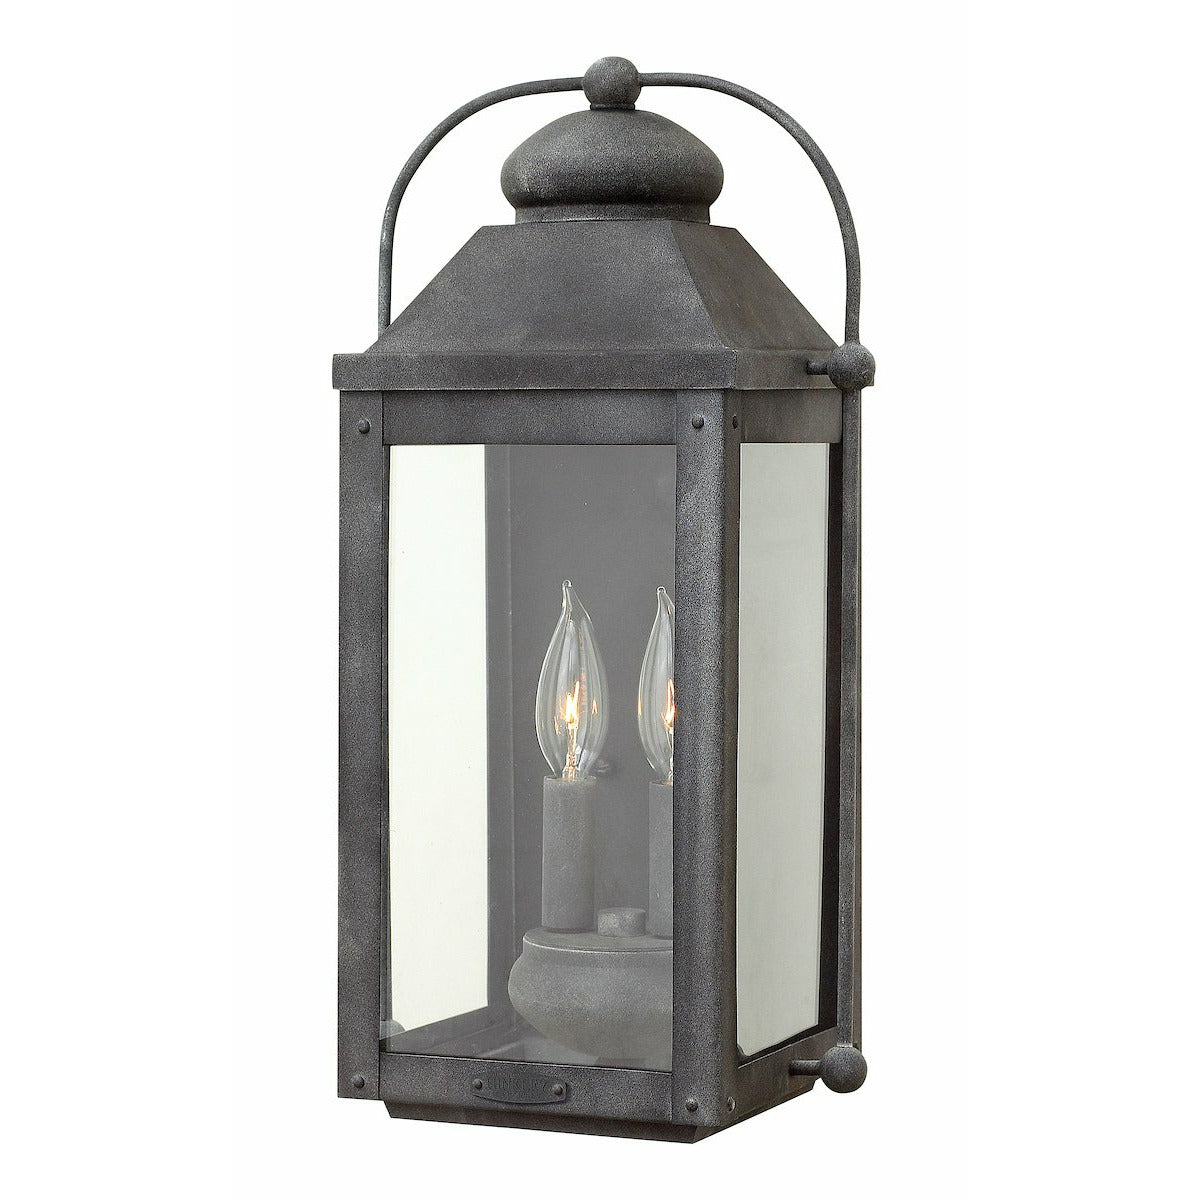 Anchorage Outdoor Wall Light Aged Zinc-LL